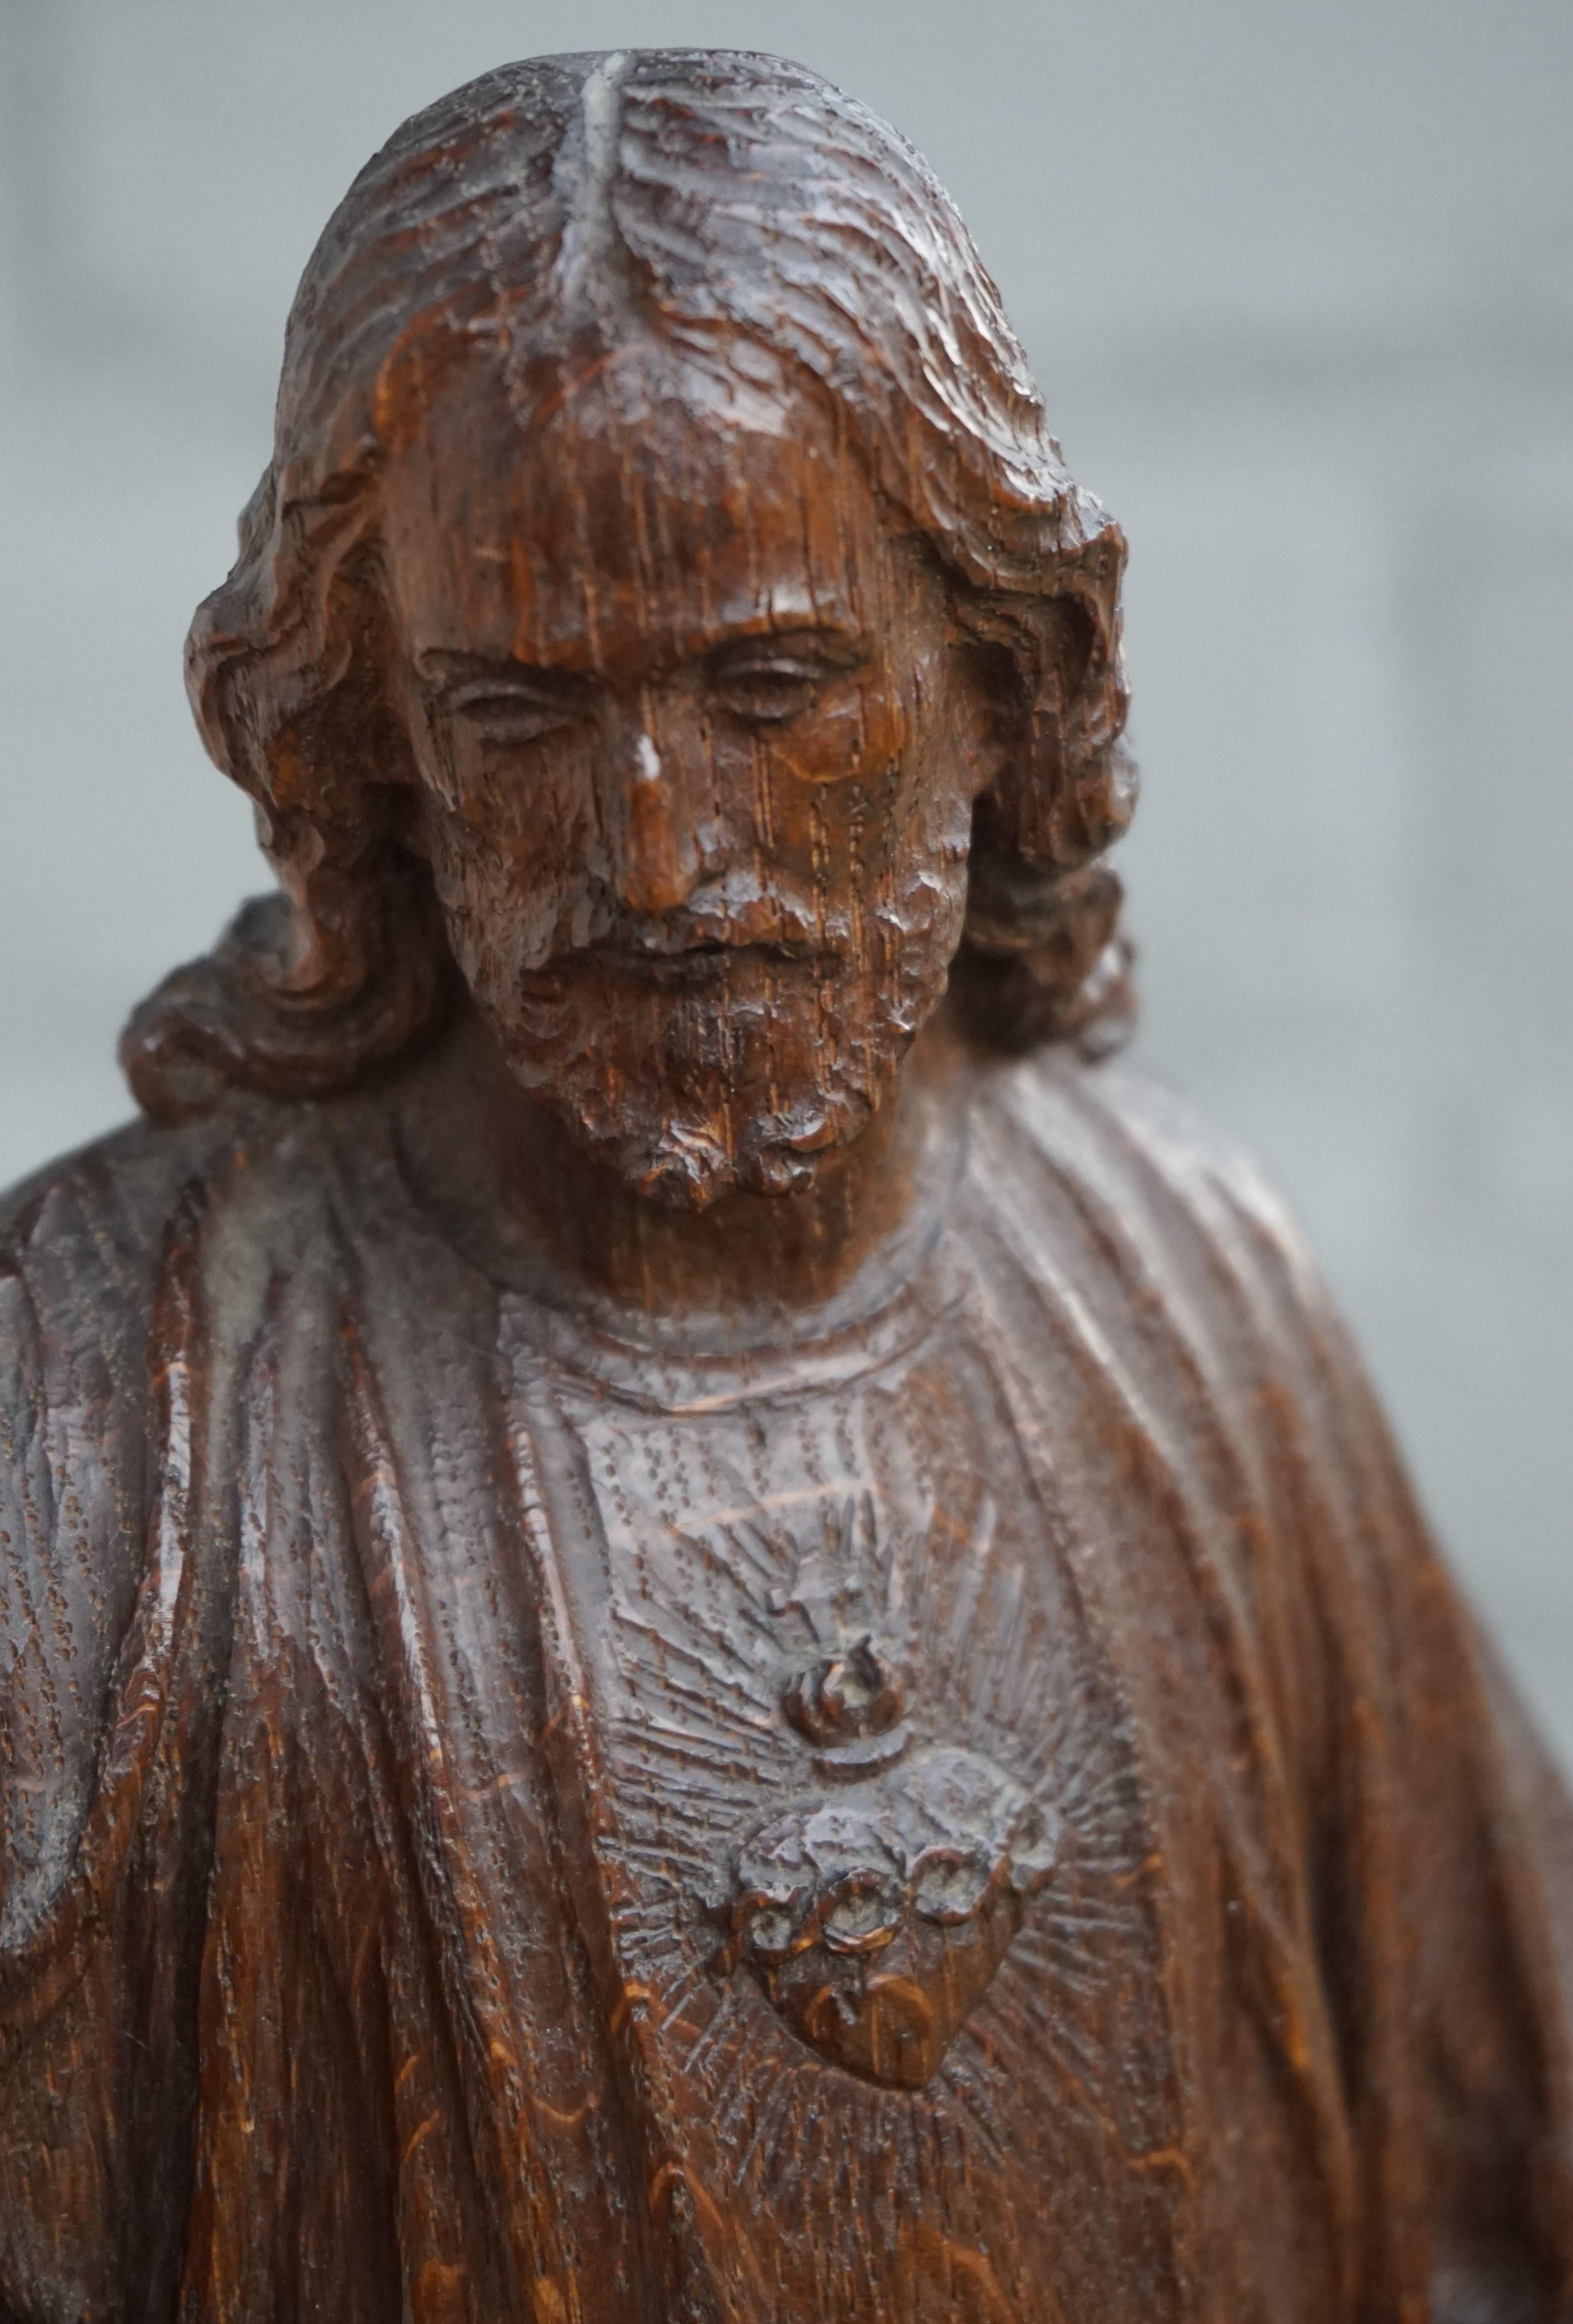 Oak Antique and Hand Carved Sculpture of Our Lord & Teacher Jesus by Bruno Gerrits